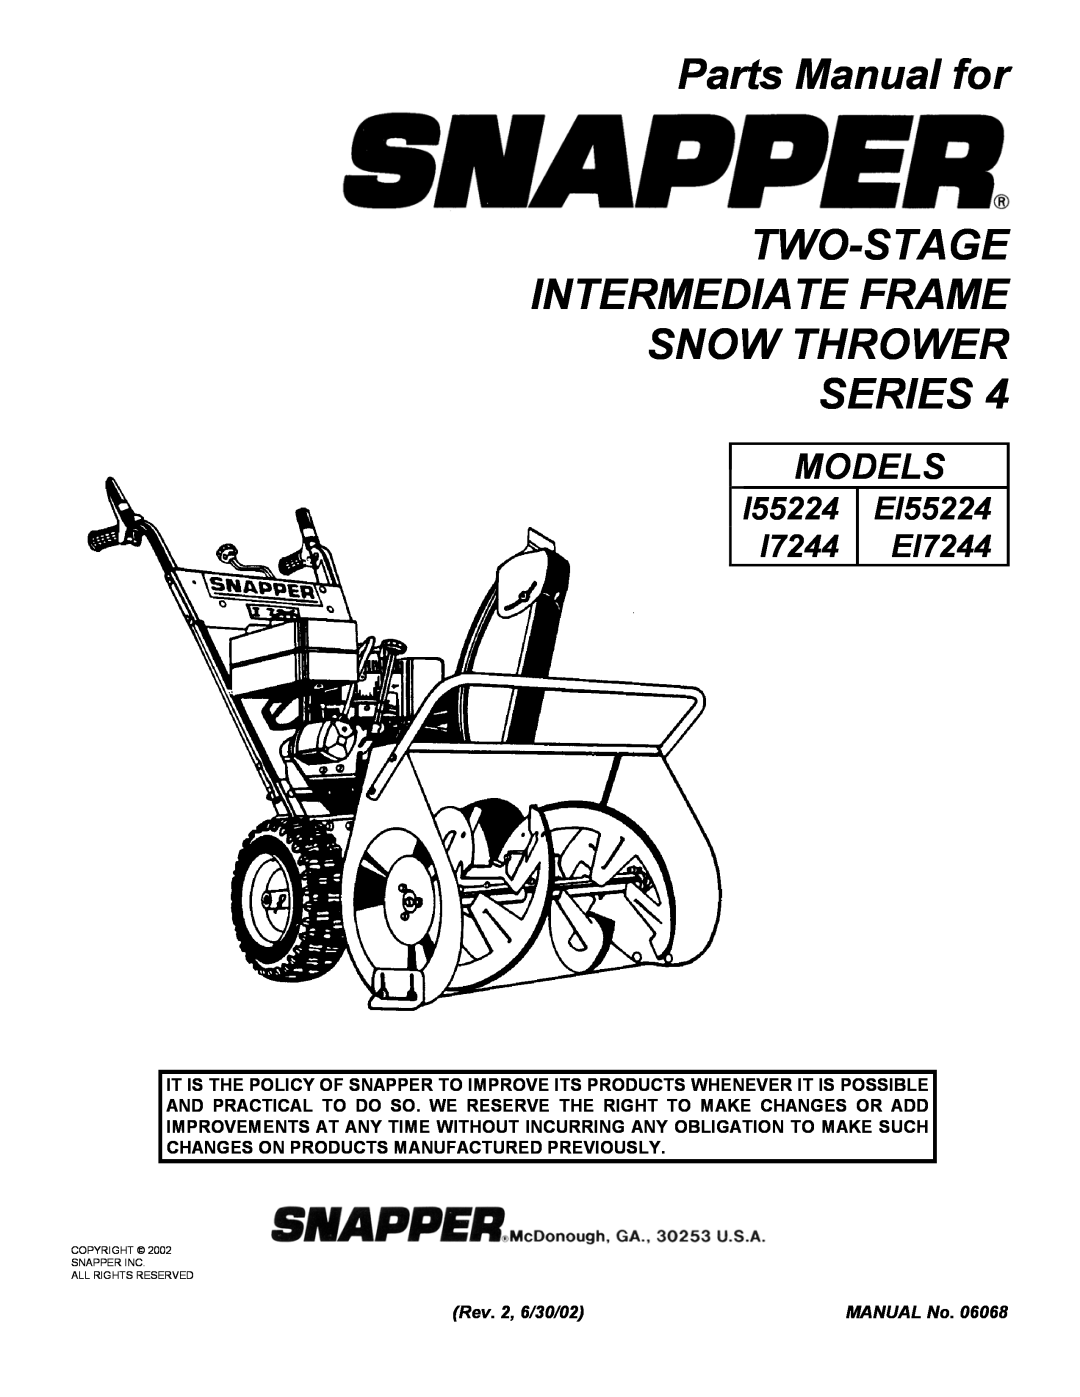 Snapper manual Parts Manual for, Two-Stageintermediate Frame Snow Thrower Series, EI55224 EI7244, Models, MANUAL No 